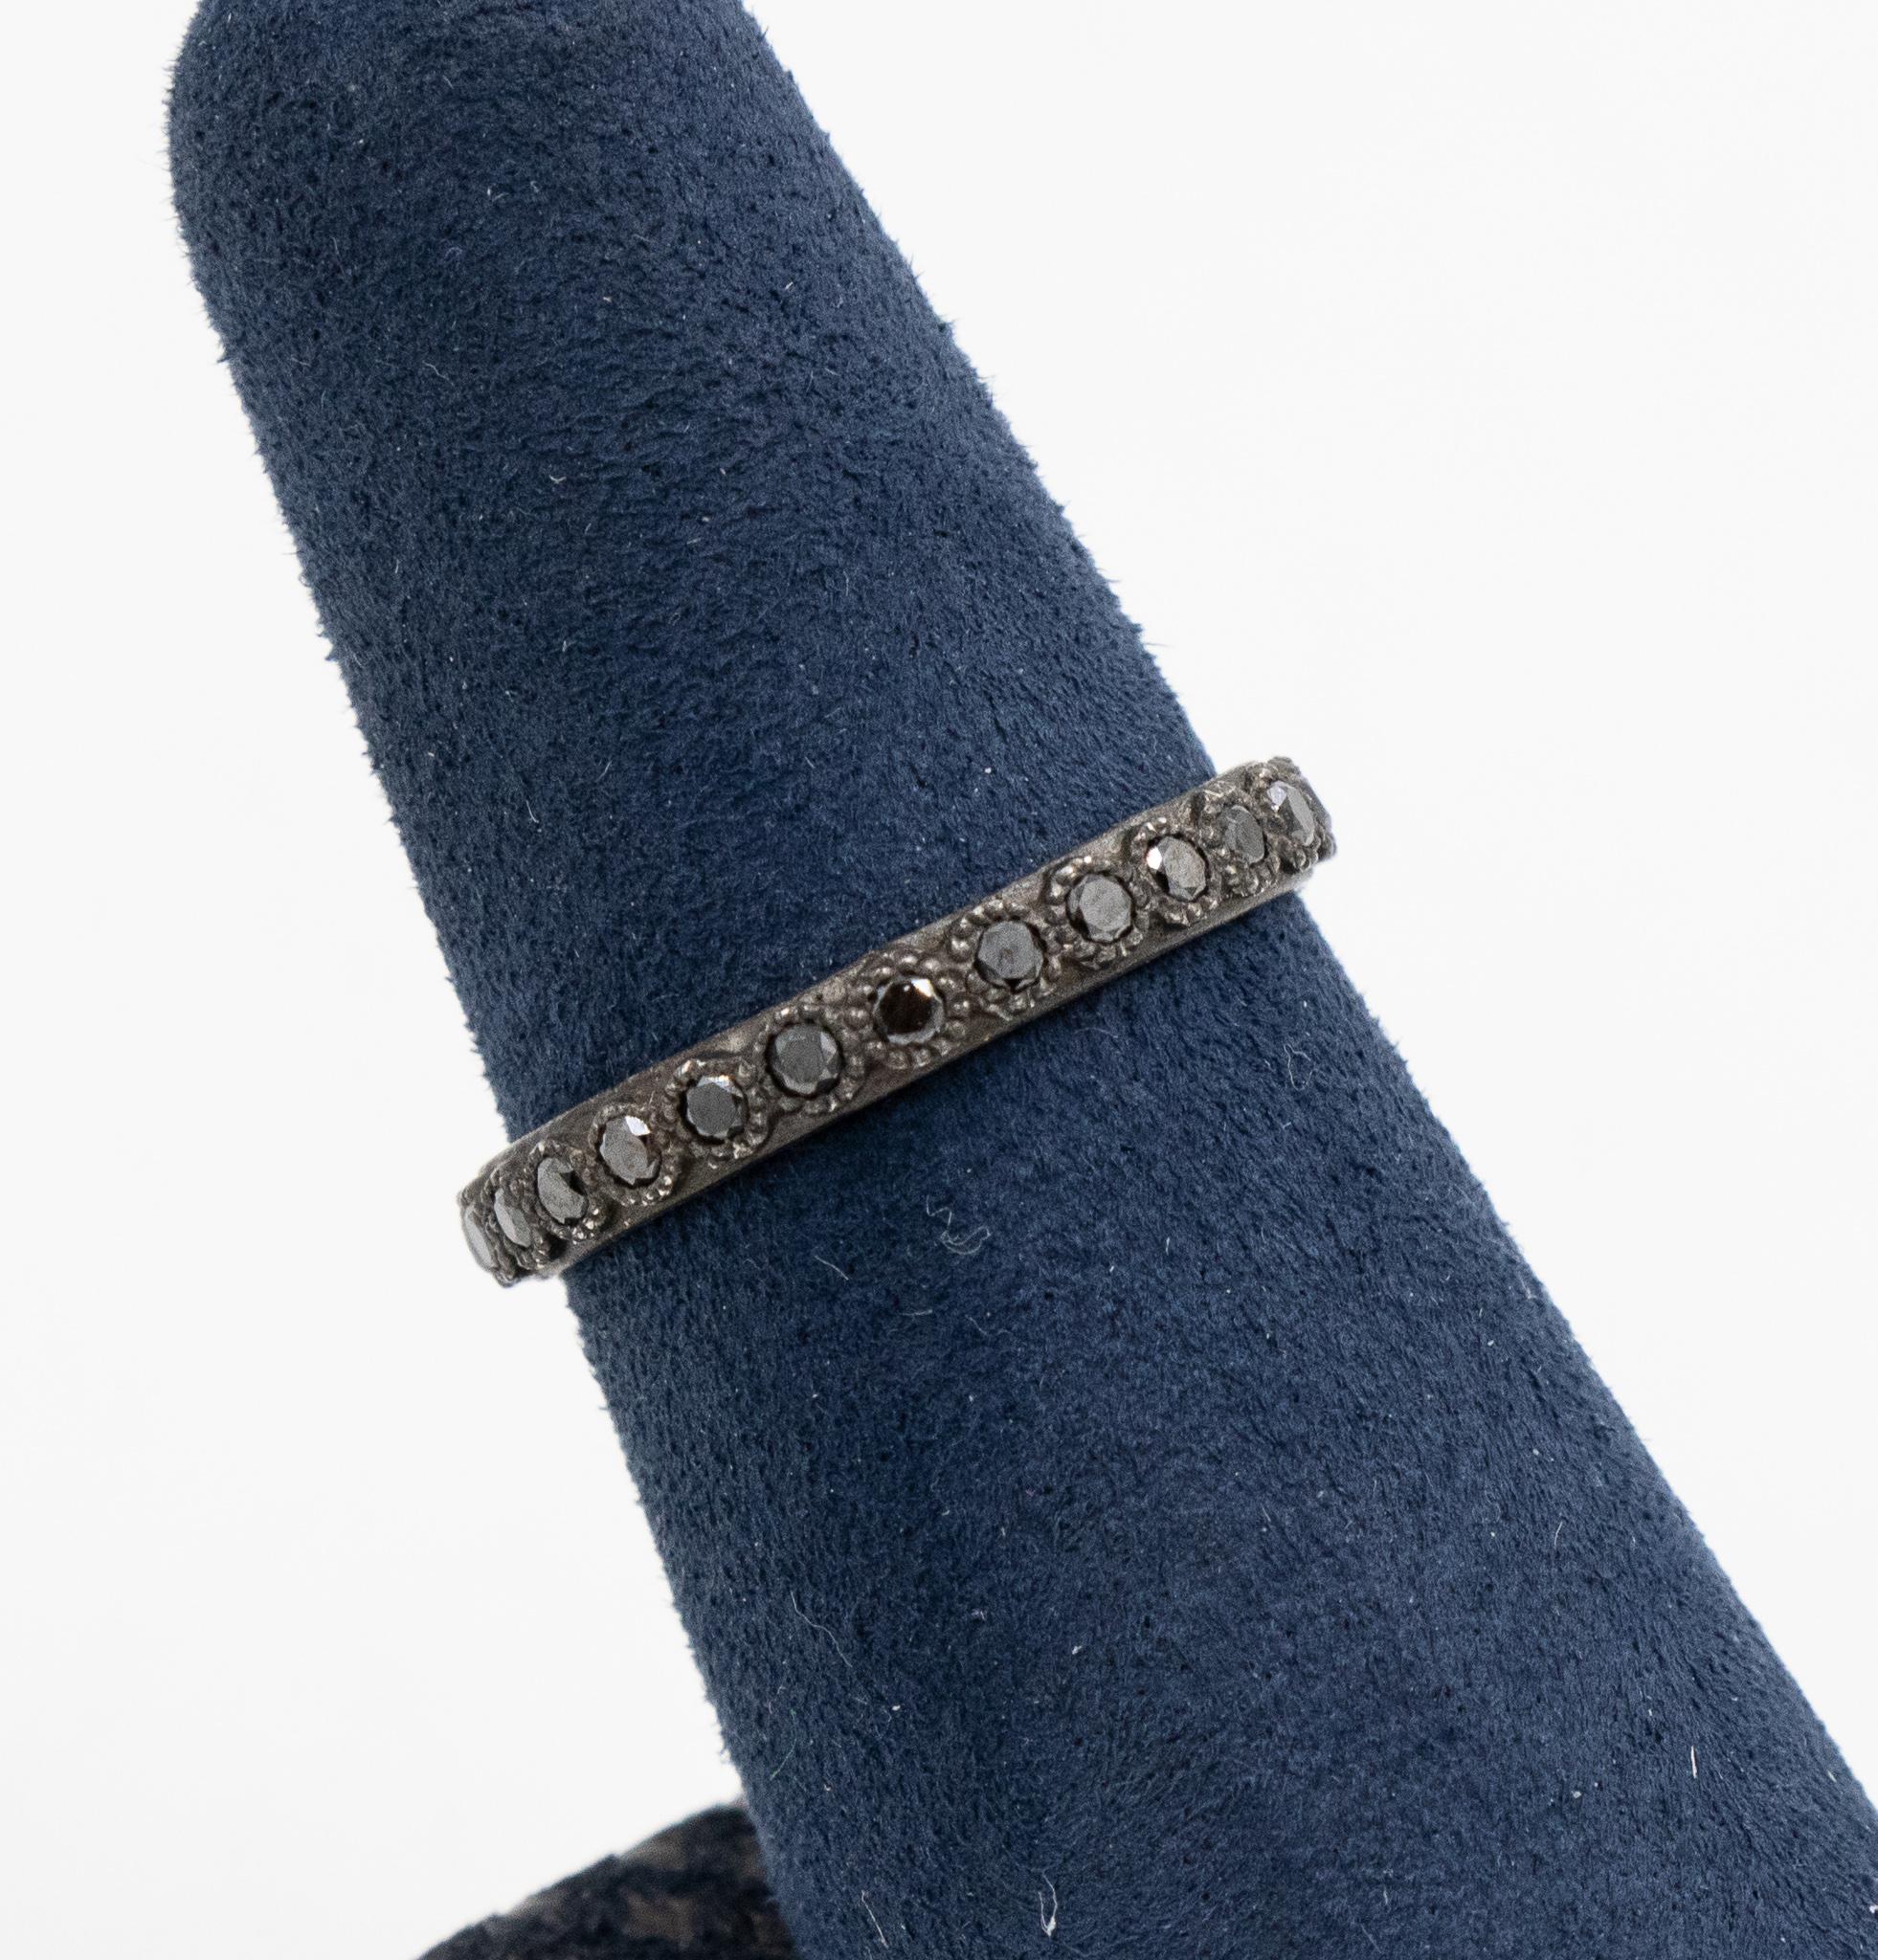 This Old World collection Armenta ring is features black diamonds totaling approximately 0.50 carats. The oxidized silver has been blackened to give it a very unique design which can be worn casually or dressed up for any occasion.  This is an